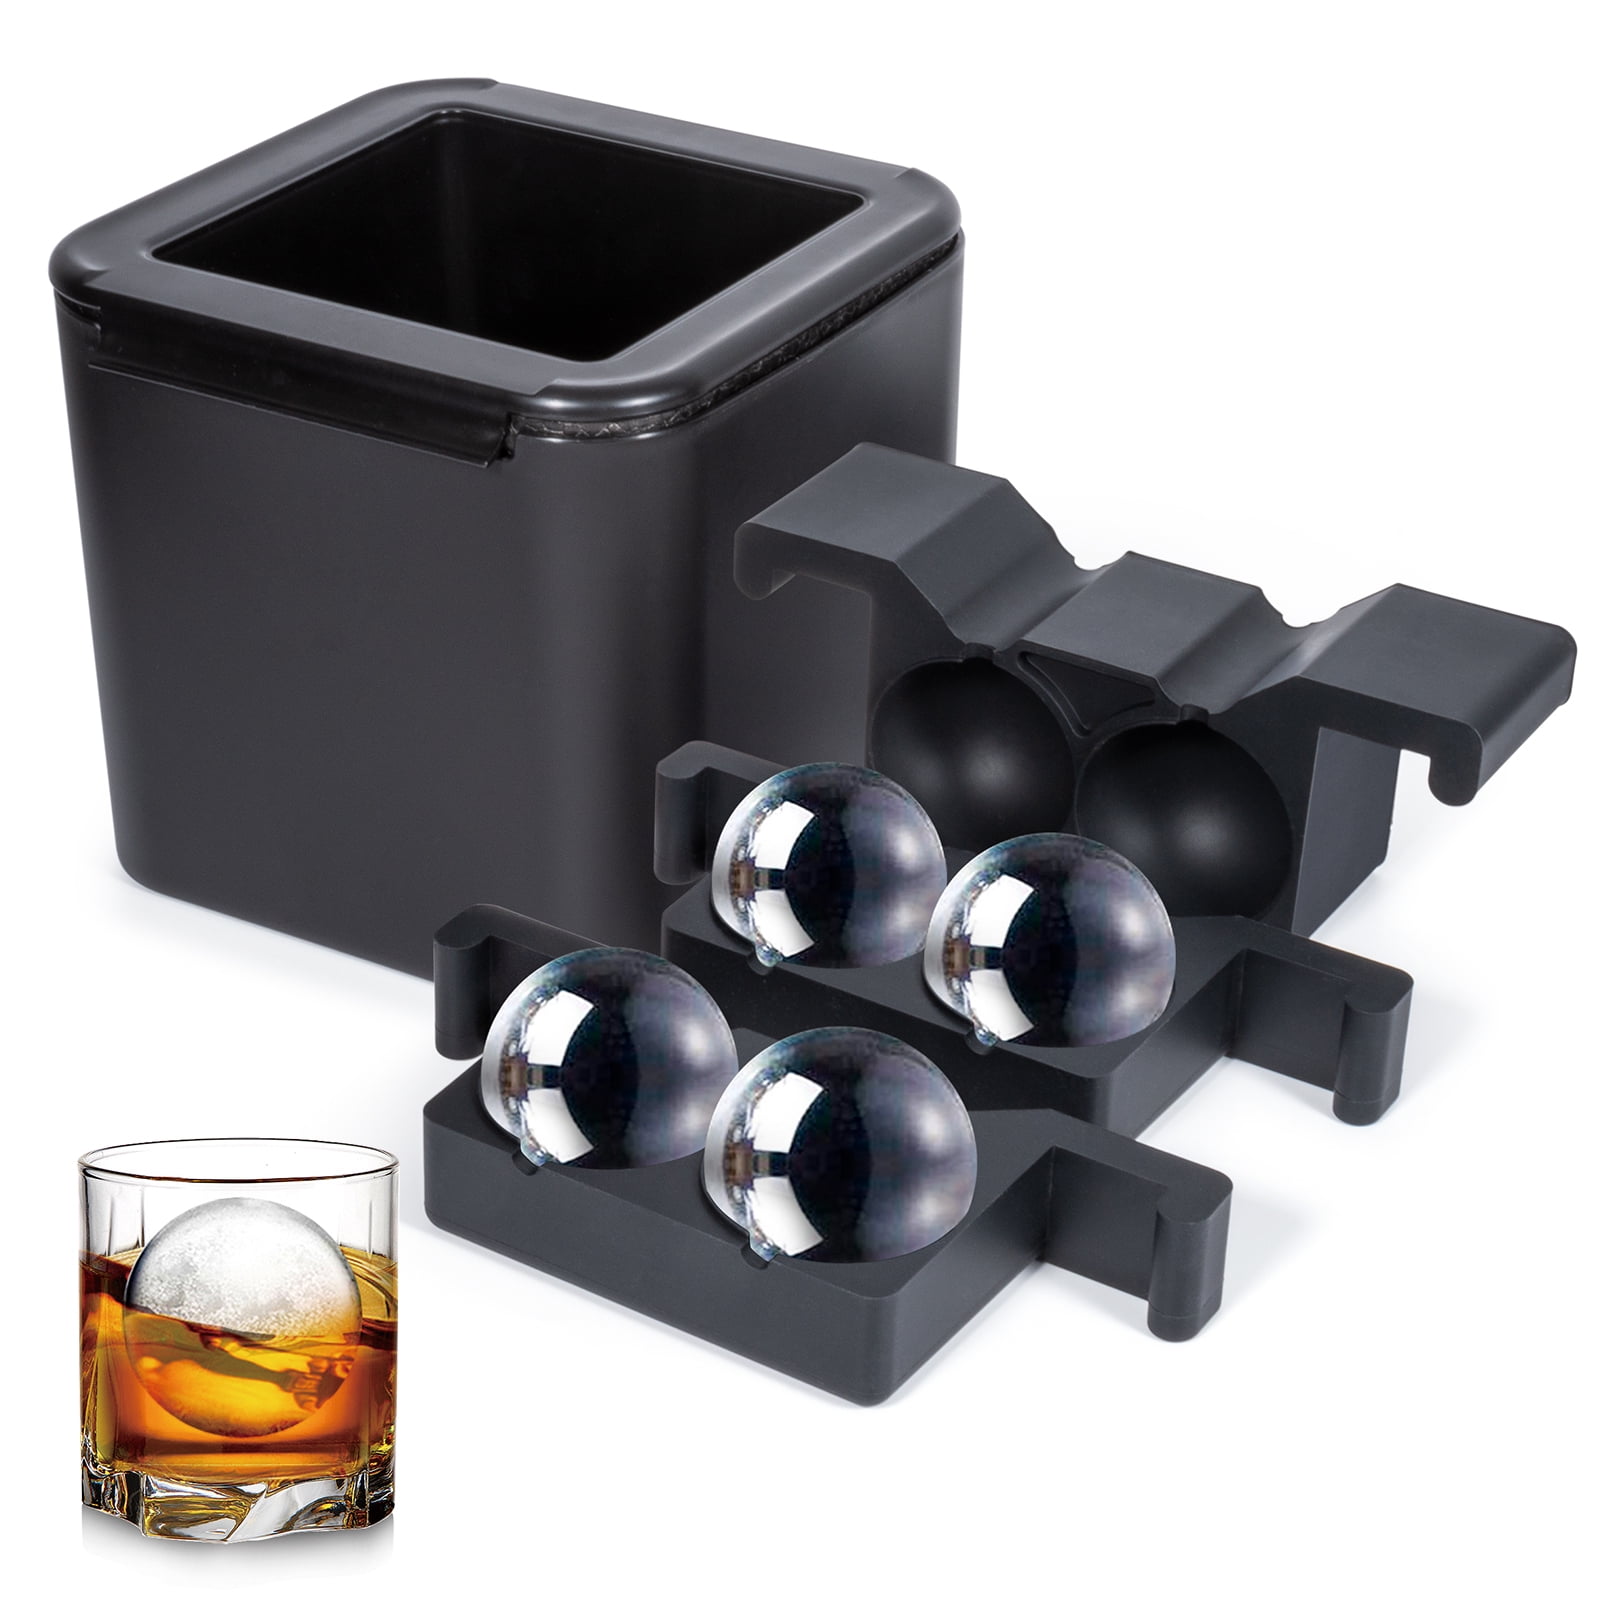 Das TooKii Clear Ice Cube Maker, Reusable 4 Hole Crystal Ice Mold, BPA Free  Silicone Ice Cube Tray, 2 Inches Large Sphere Square Ice Maker for Whiskey